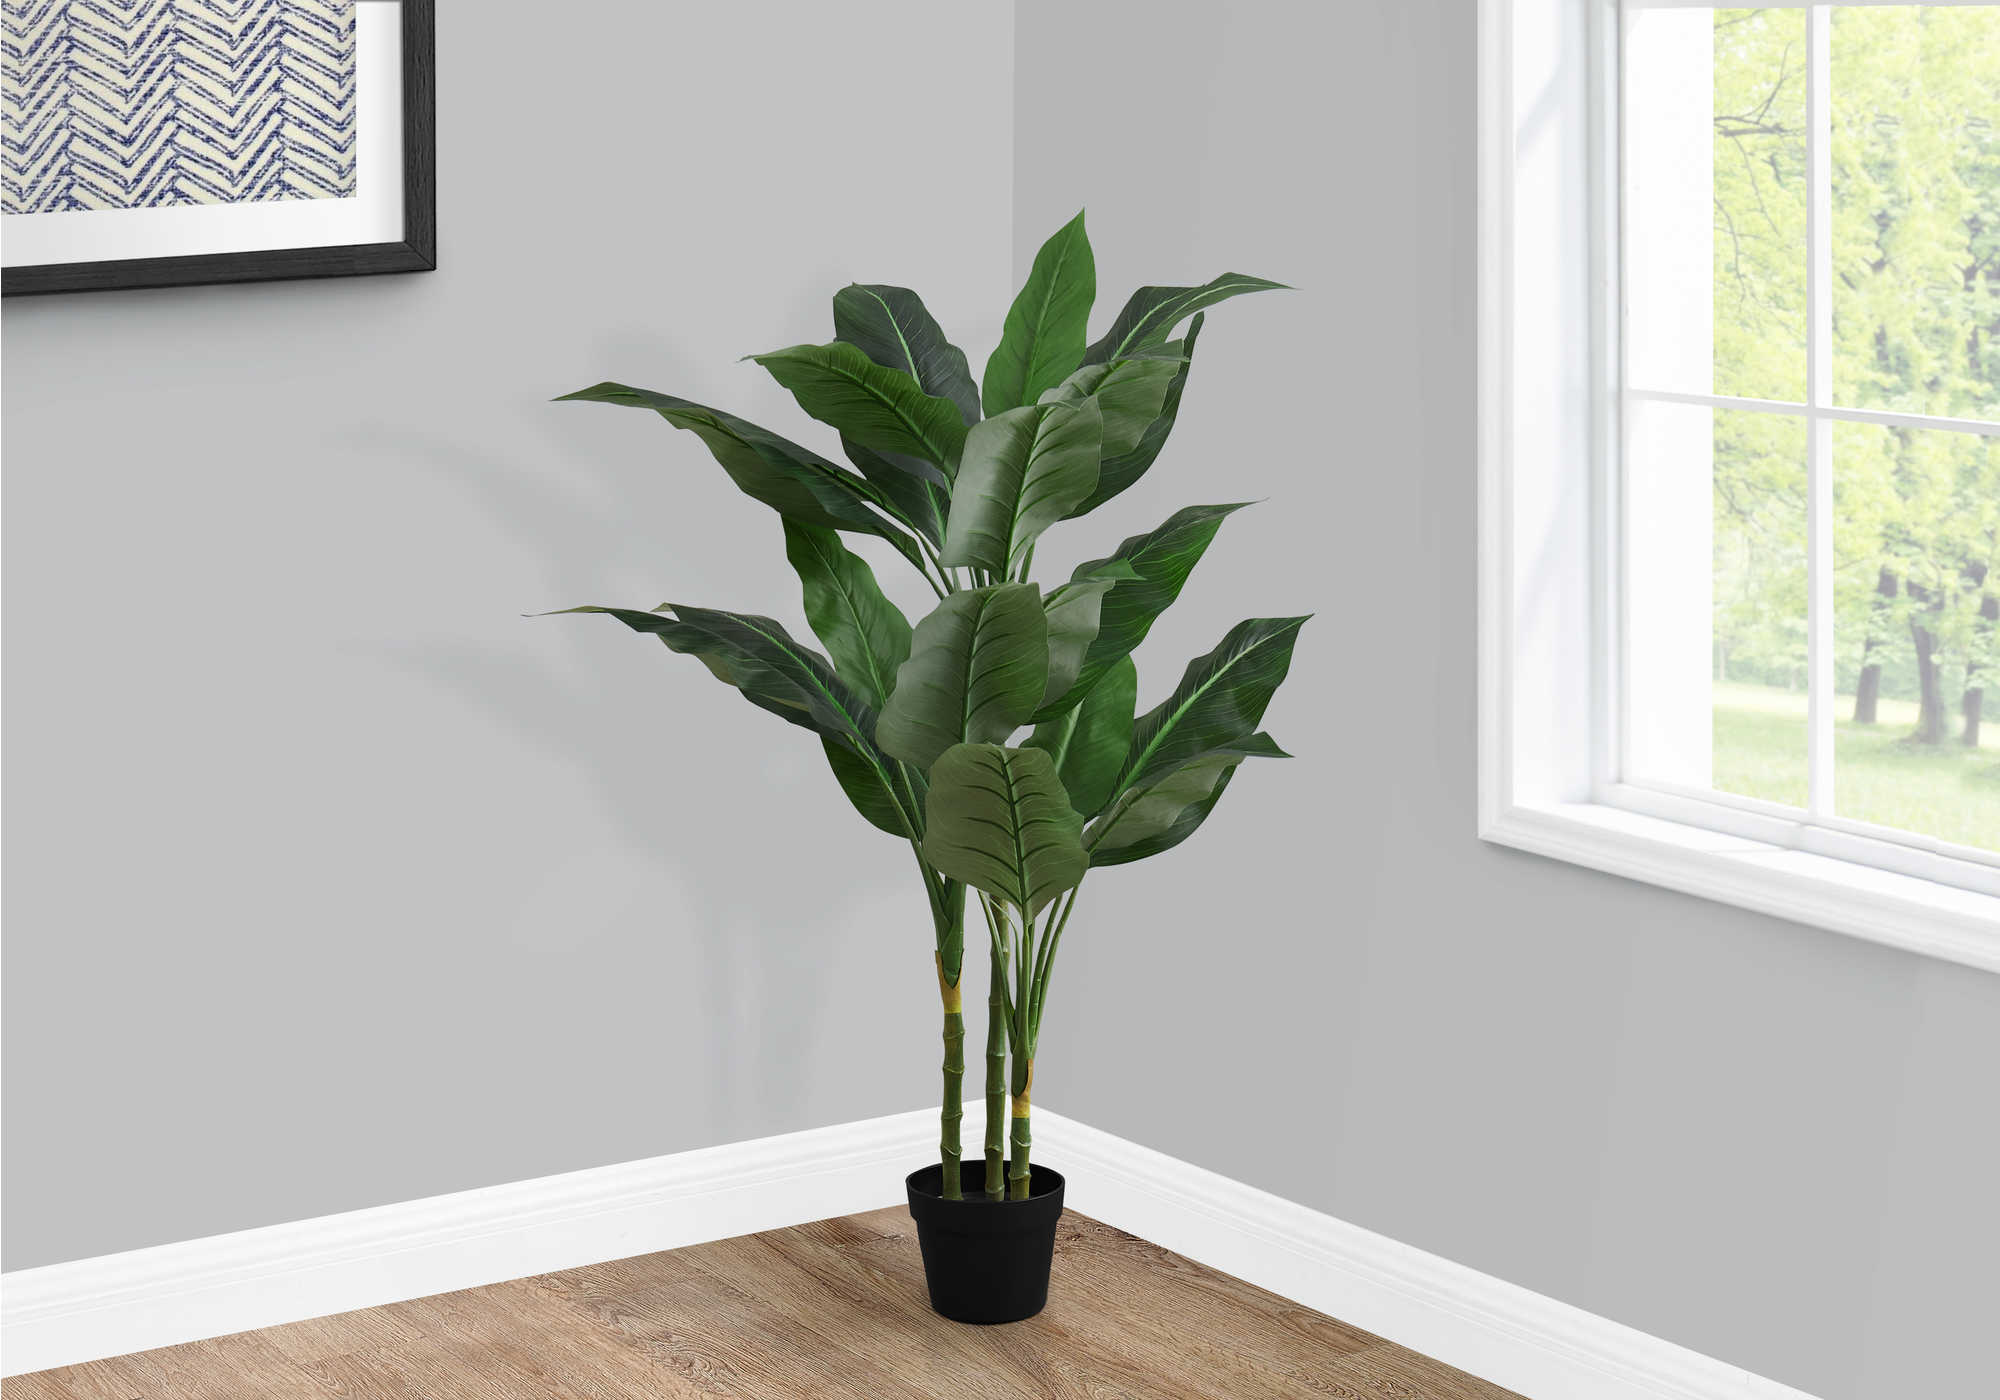 ARTIFICIAL PLANT - 42"H / INDOOR EVERGREEN IN A 5" POT